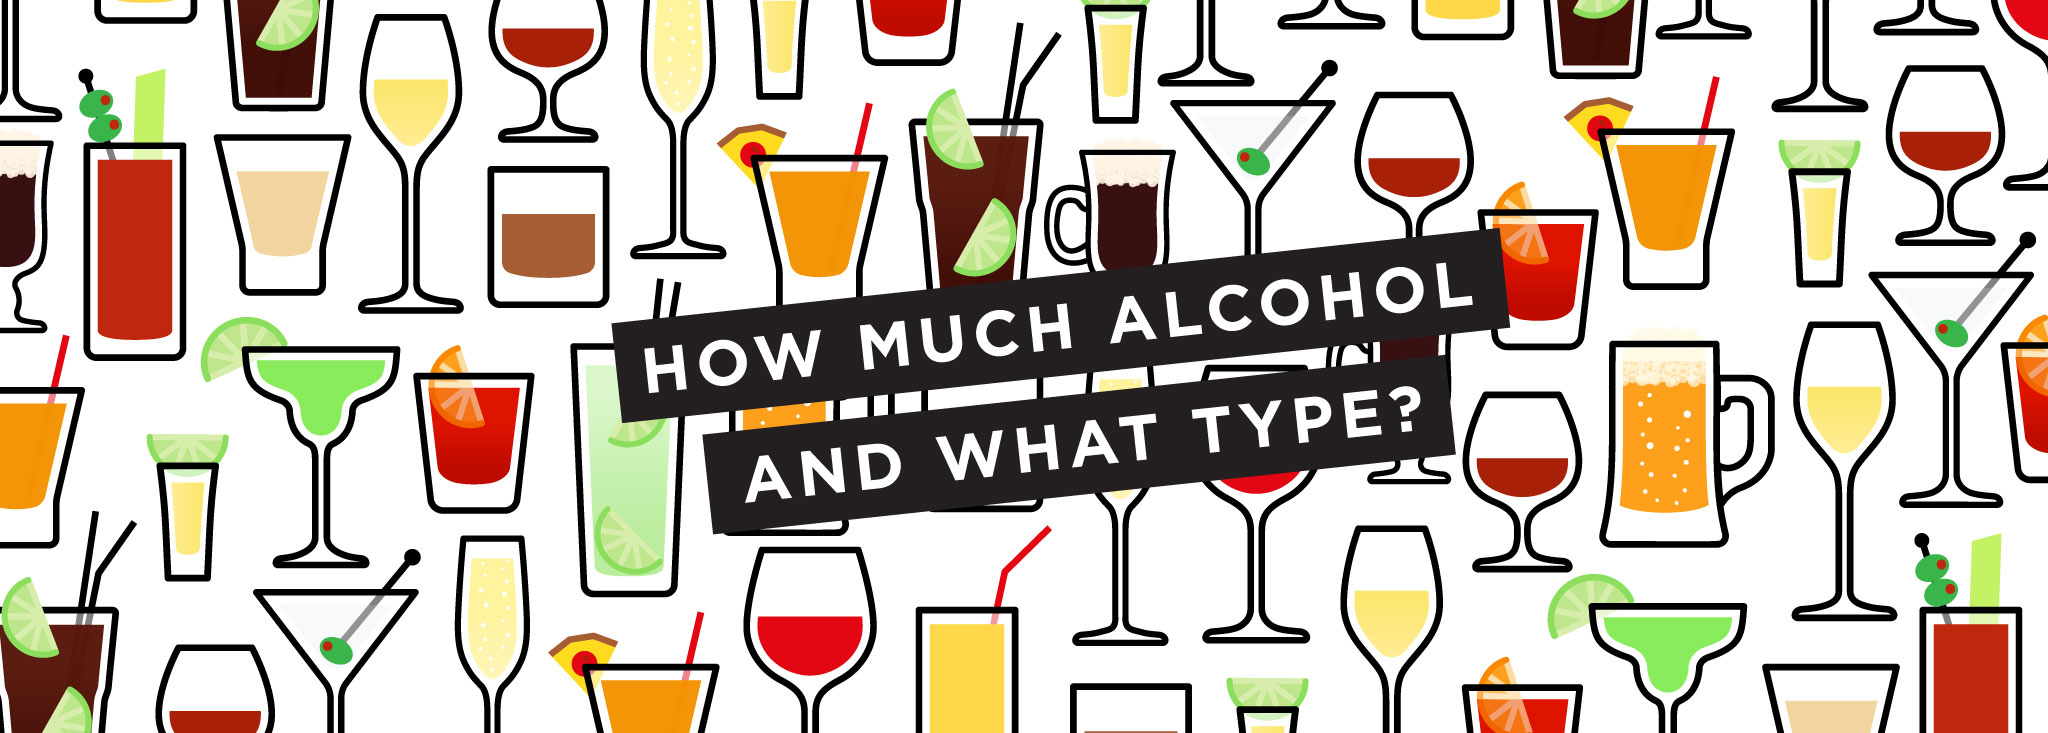 How Much Sugar In Alcohol Chart